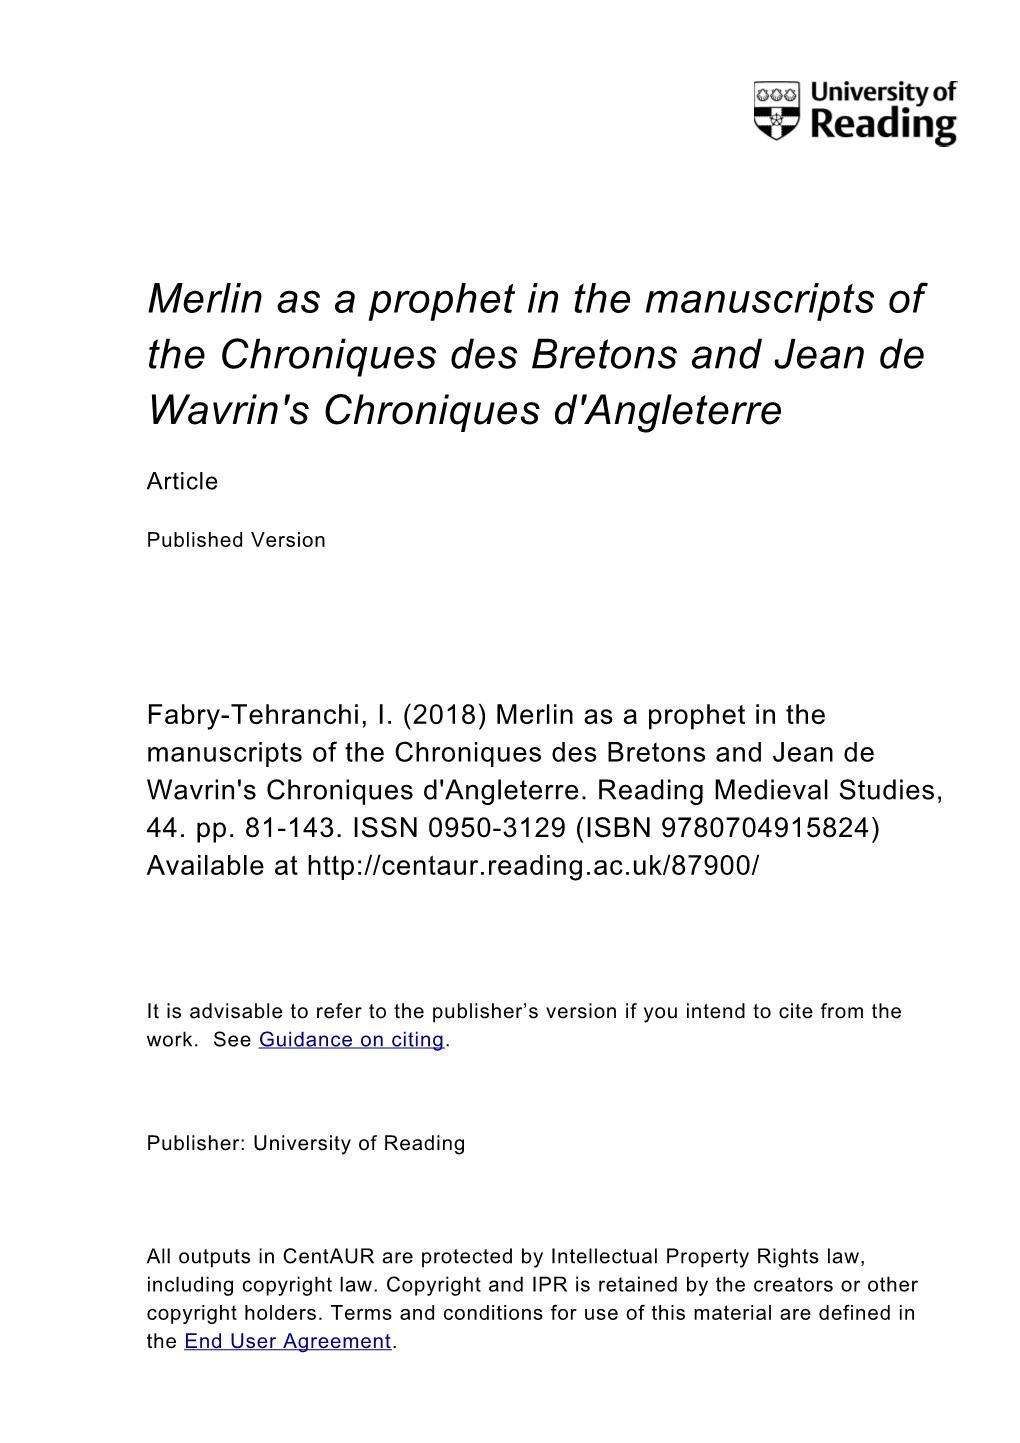 Merlin As a Prophet in the Manuscripts of the Chroniques Des Bretons and Jean De Wavrin's Chroniques D'angleterre